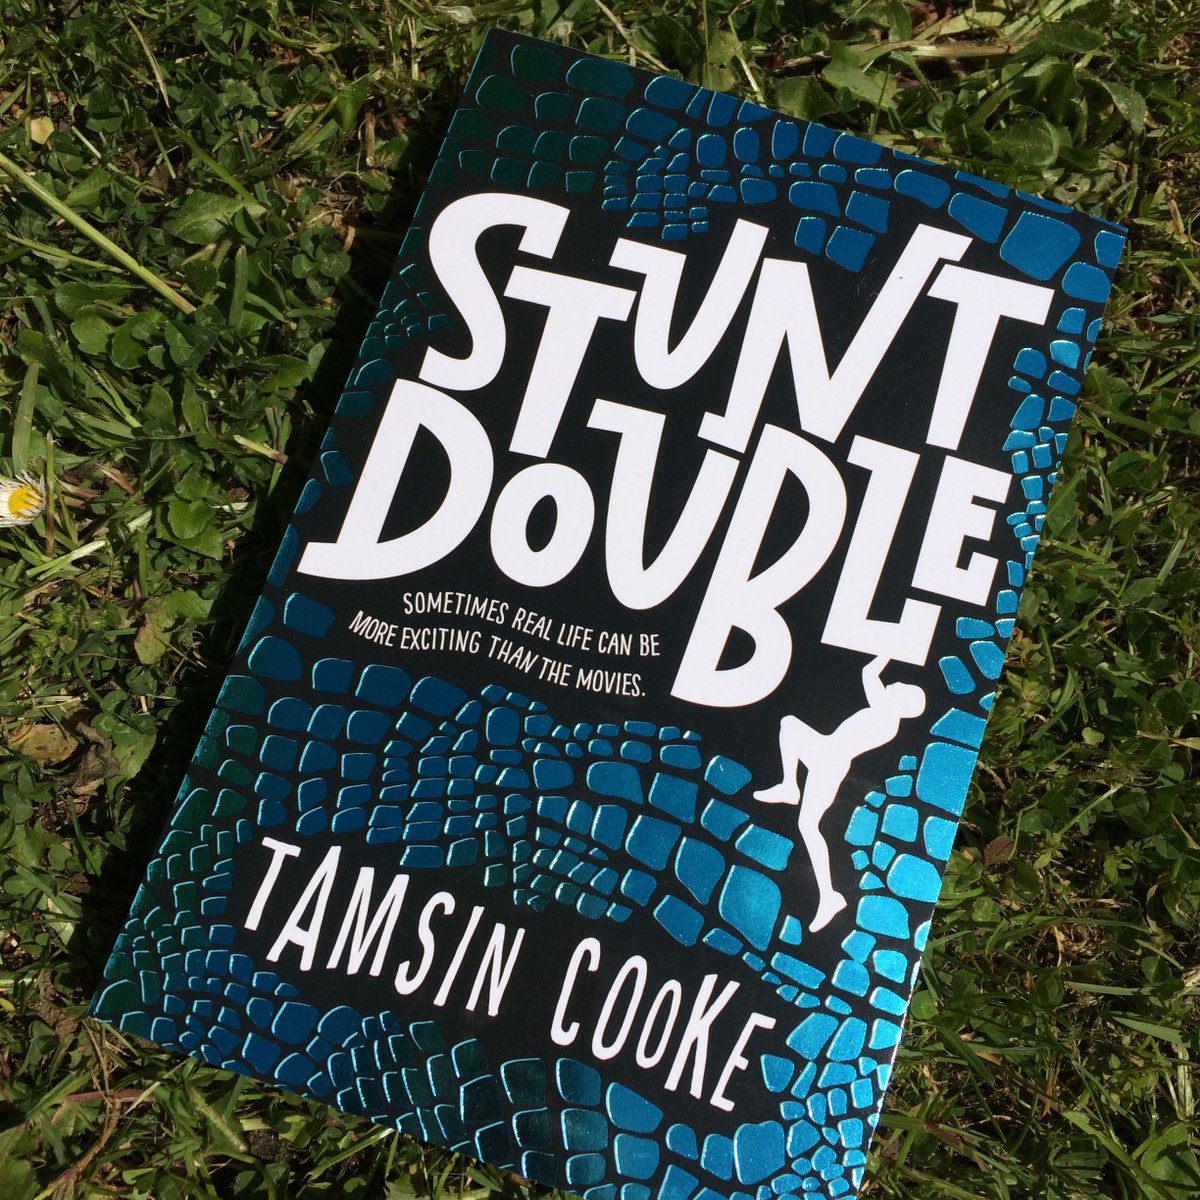 Watched #TheFallGuy and absolutely loved it. Ryan Gosling and Emily Blunt were brilliant and it was so much fun. So I thought I'd do a shameless plug about my own book #StuntDouble A fun fast paced adventure story about a teenage stunt double for ages 9+